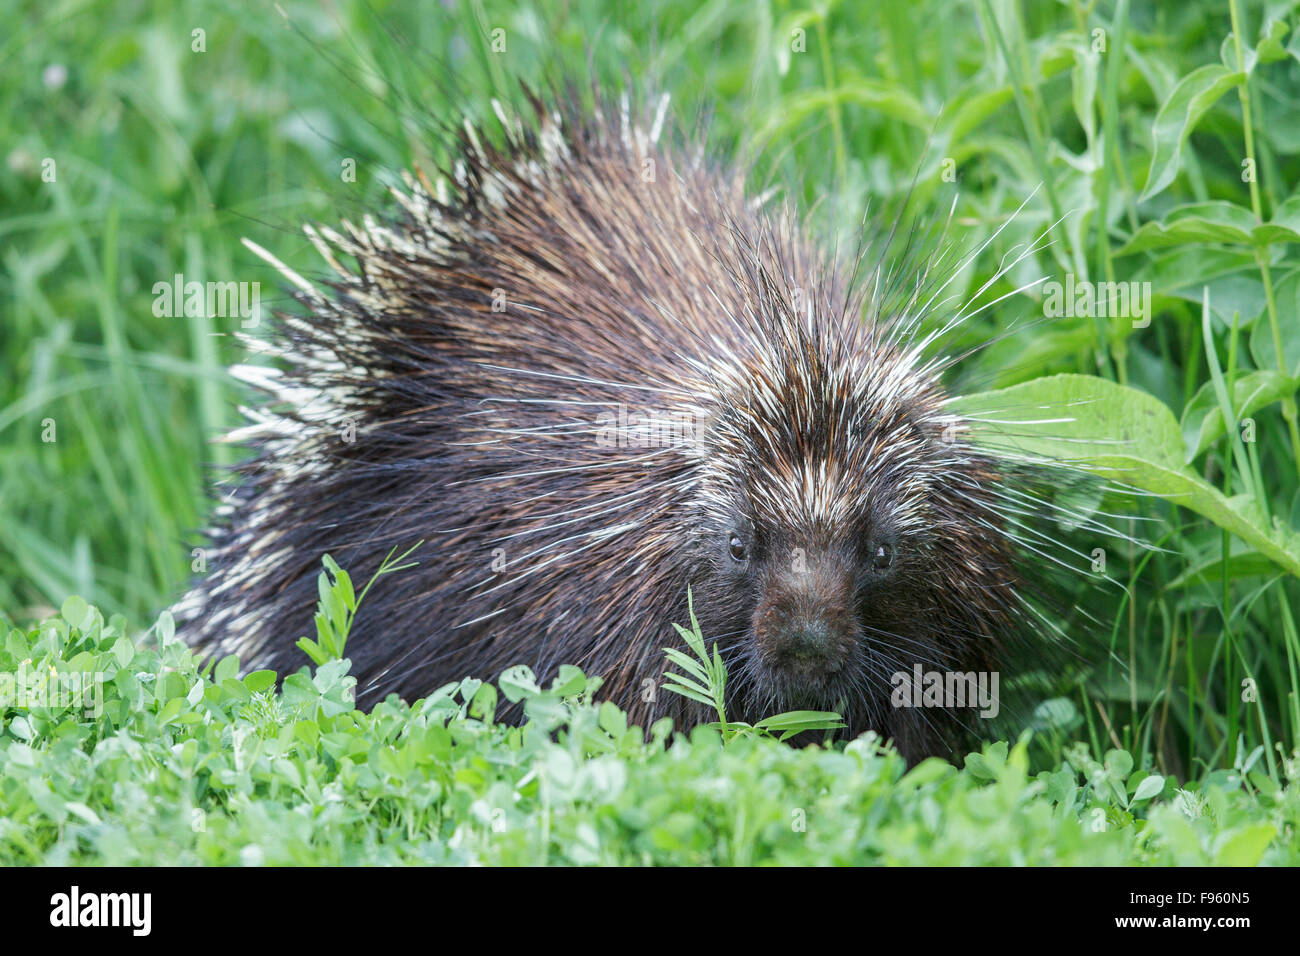 A Porcupine in southern Ontario, Canada. Stock Photo